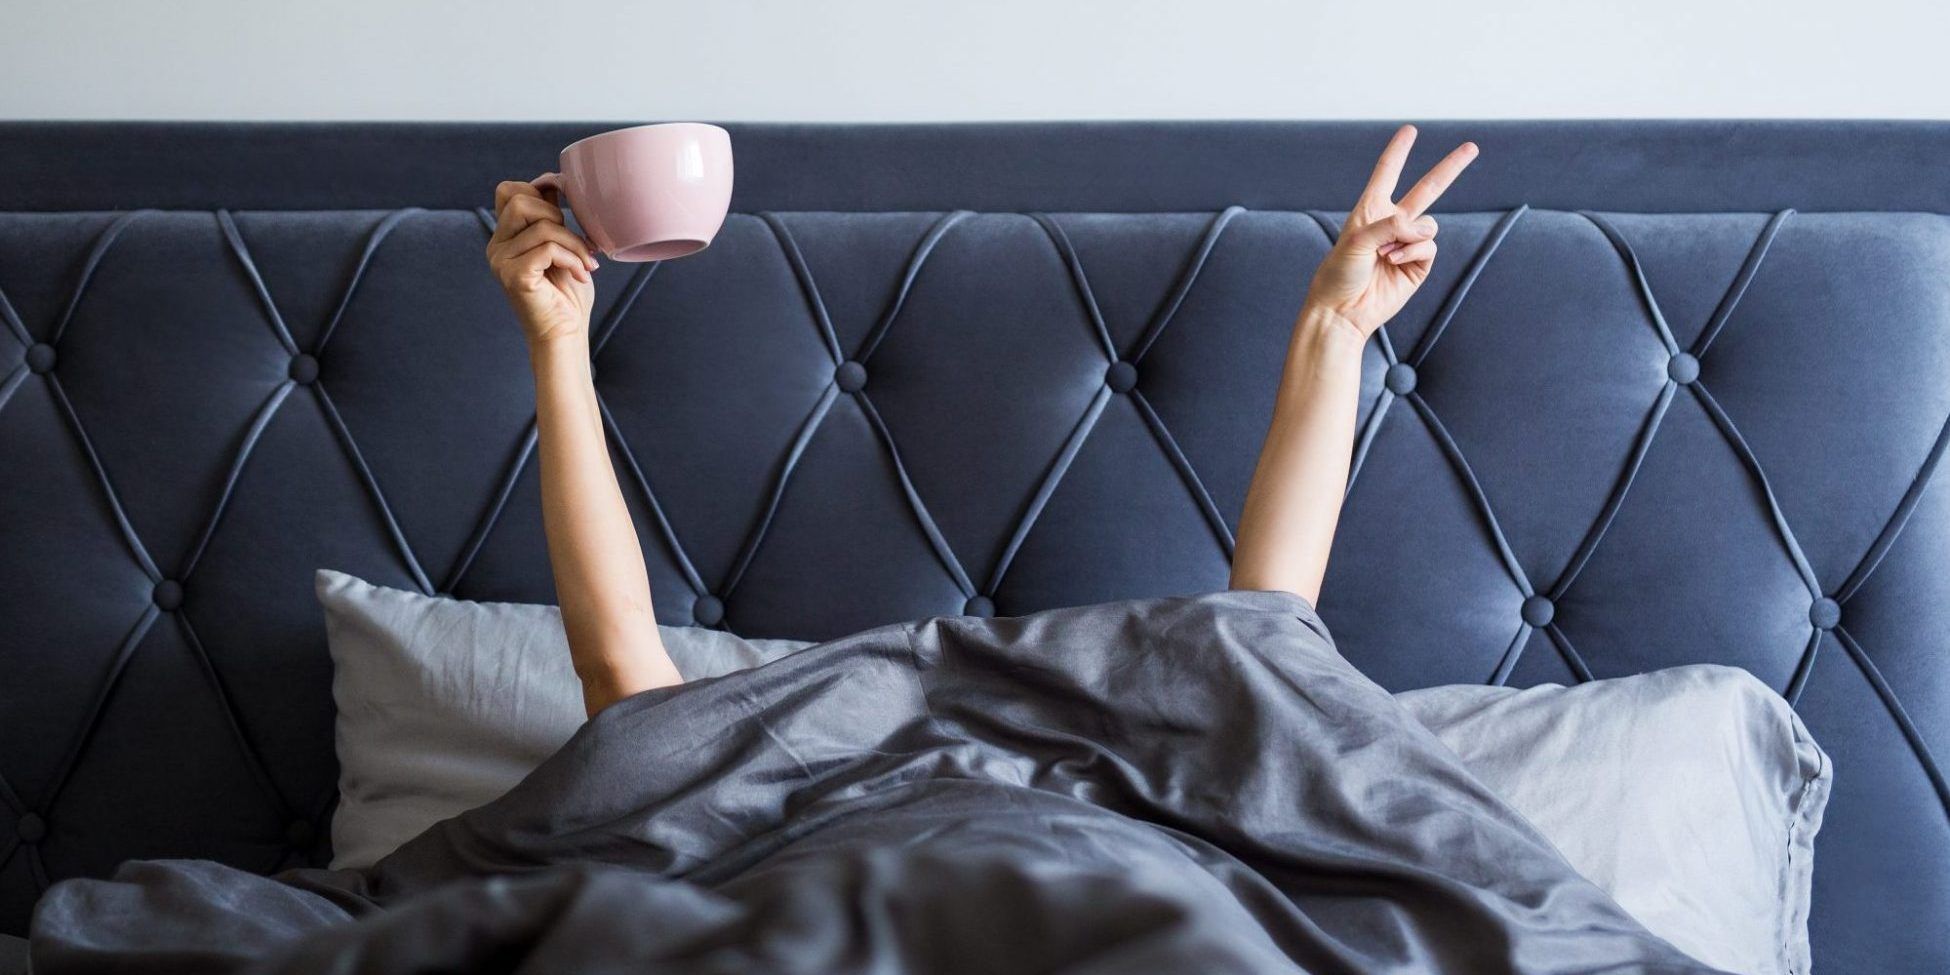 Why You Should Wake Up to Music, According to Science